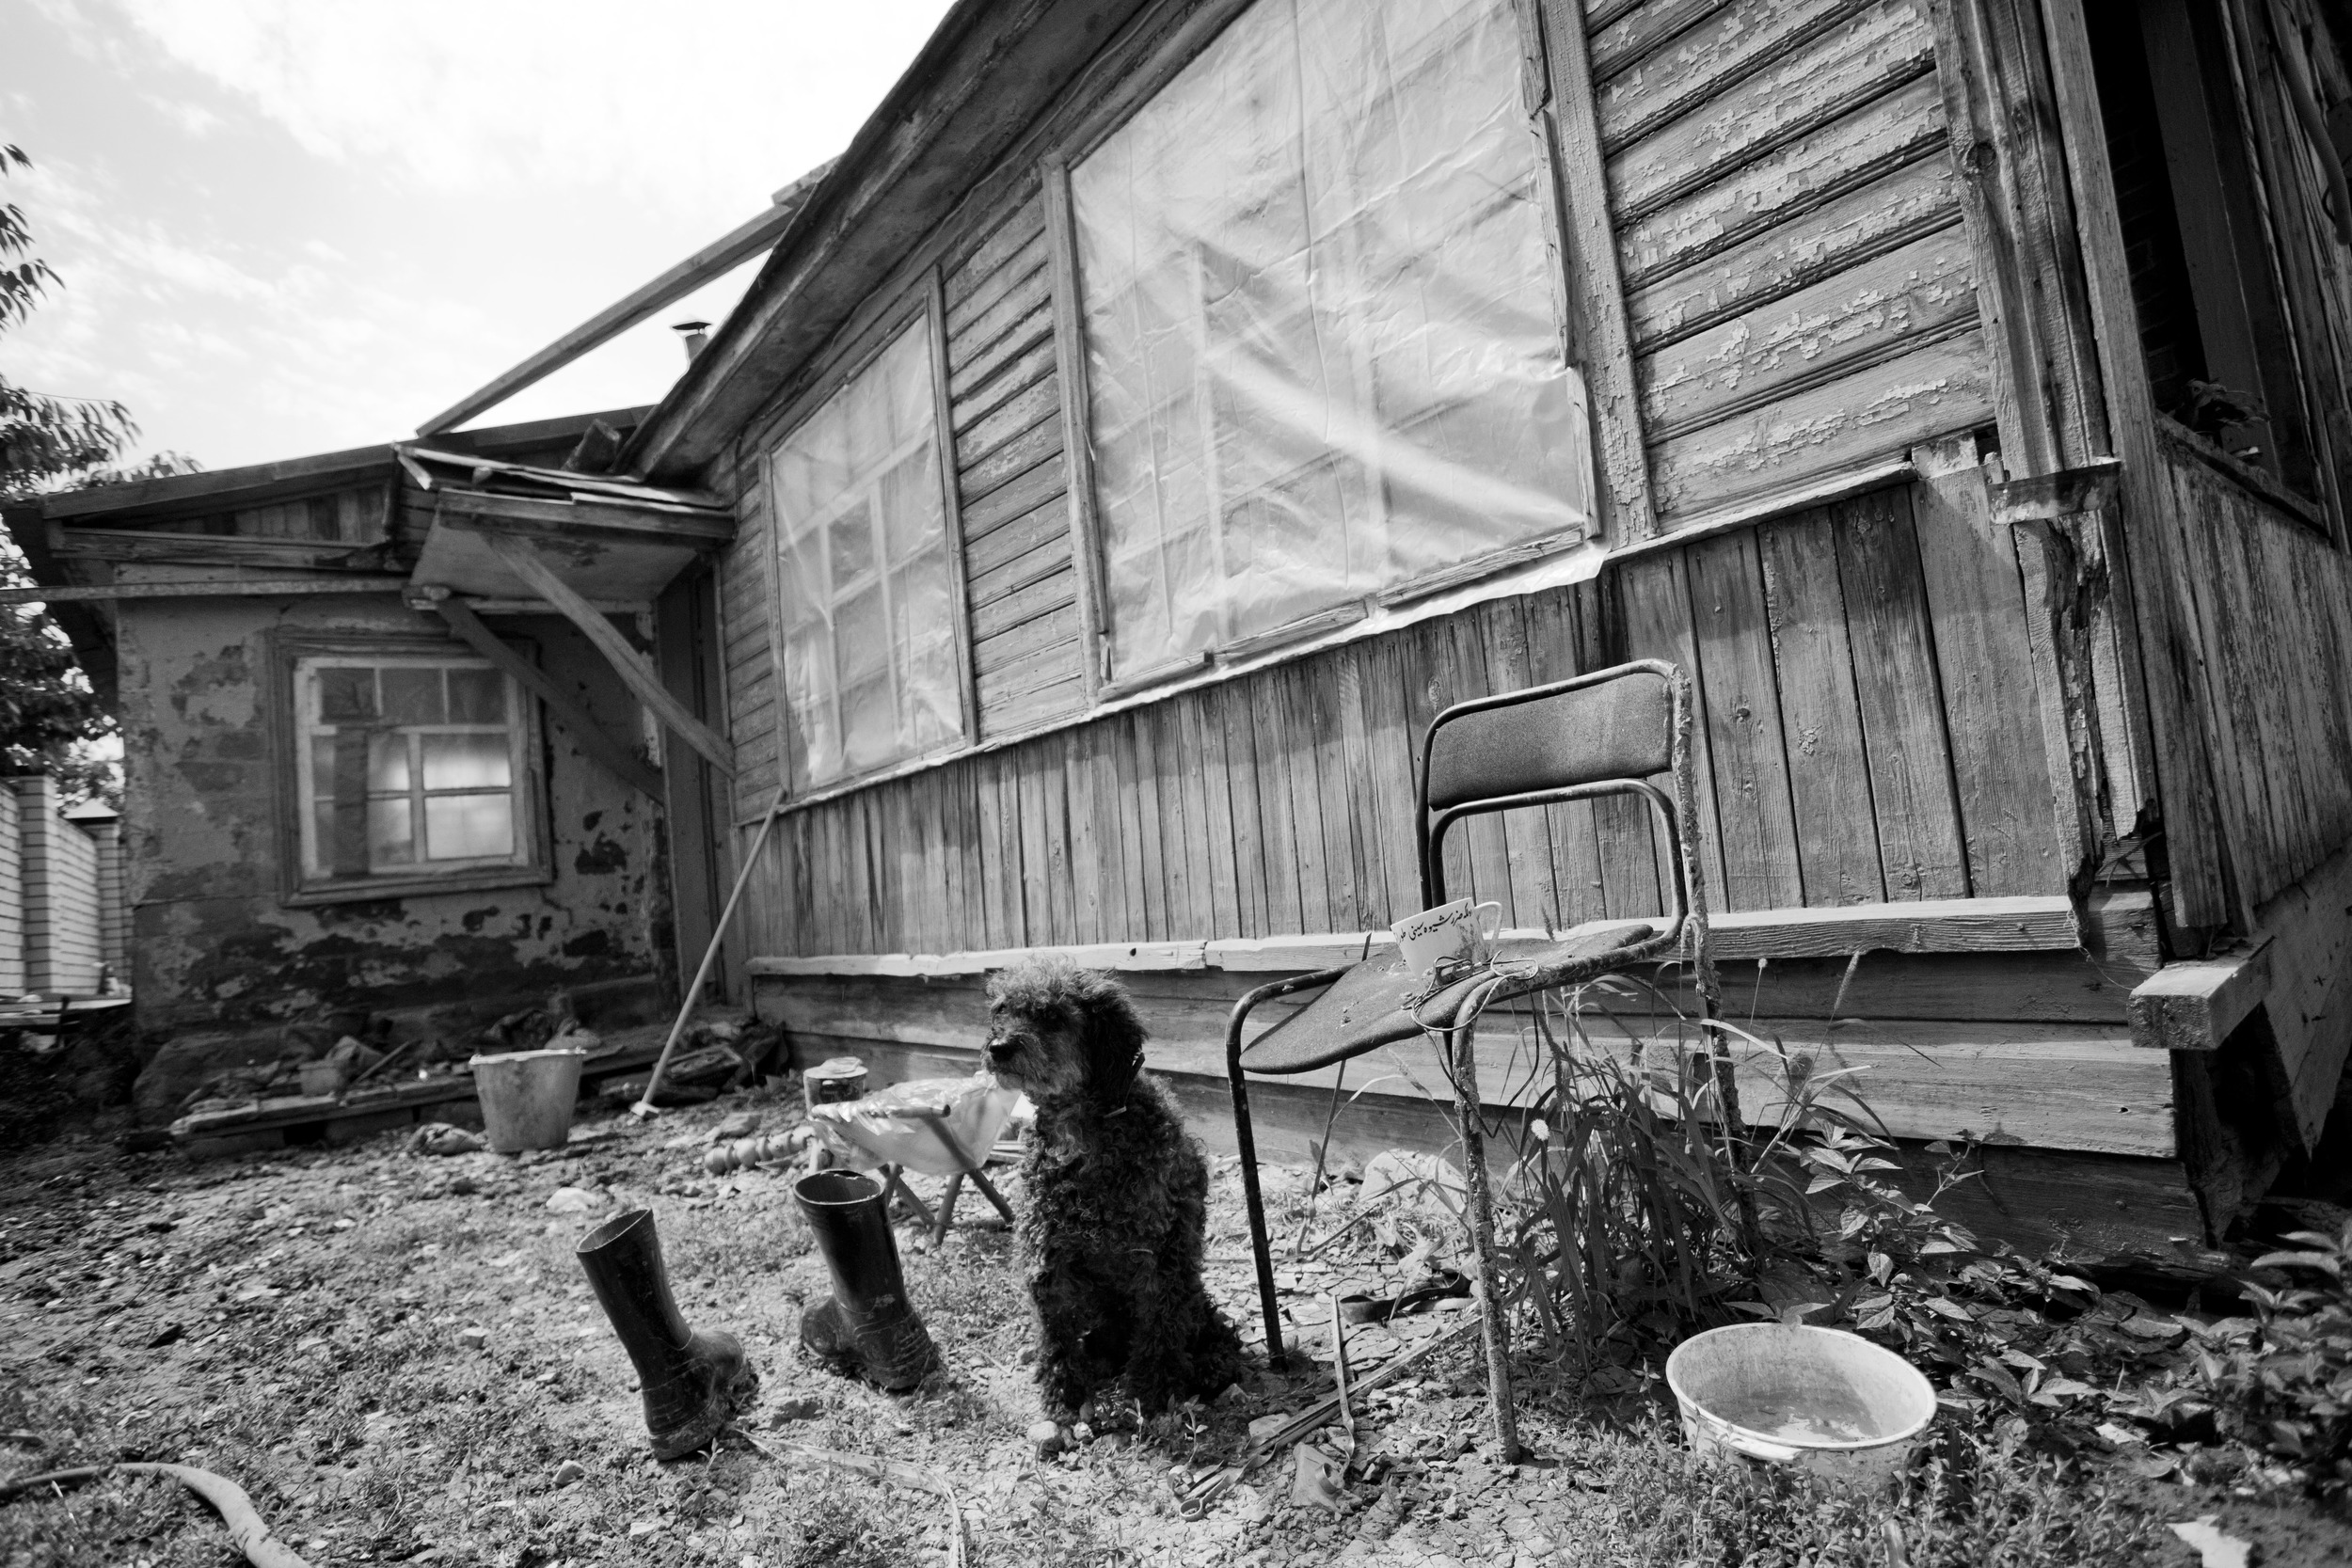 A month later, a dog waits next to an abandoned house that was damaged and left after a flood in Krymsk, Russia. August 2, 2012